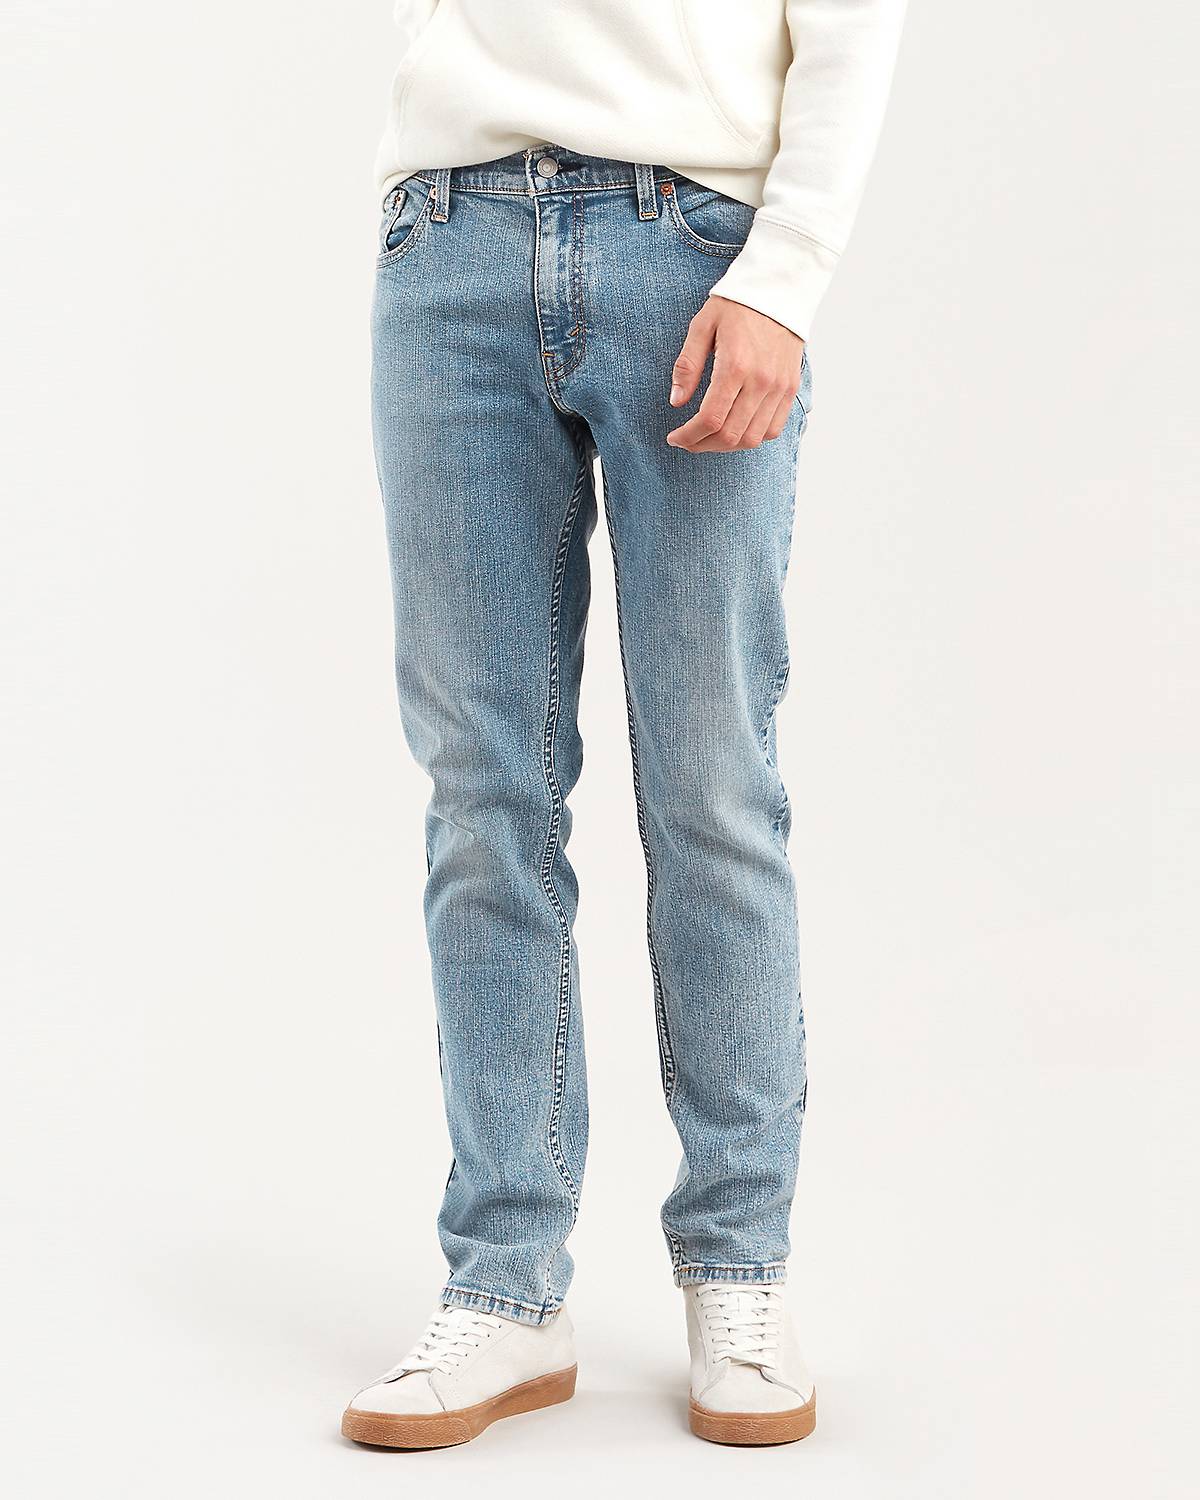 Men's Light Wash Ripped Jeans